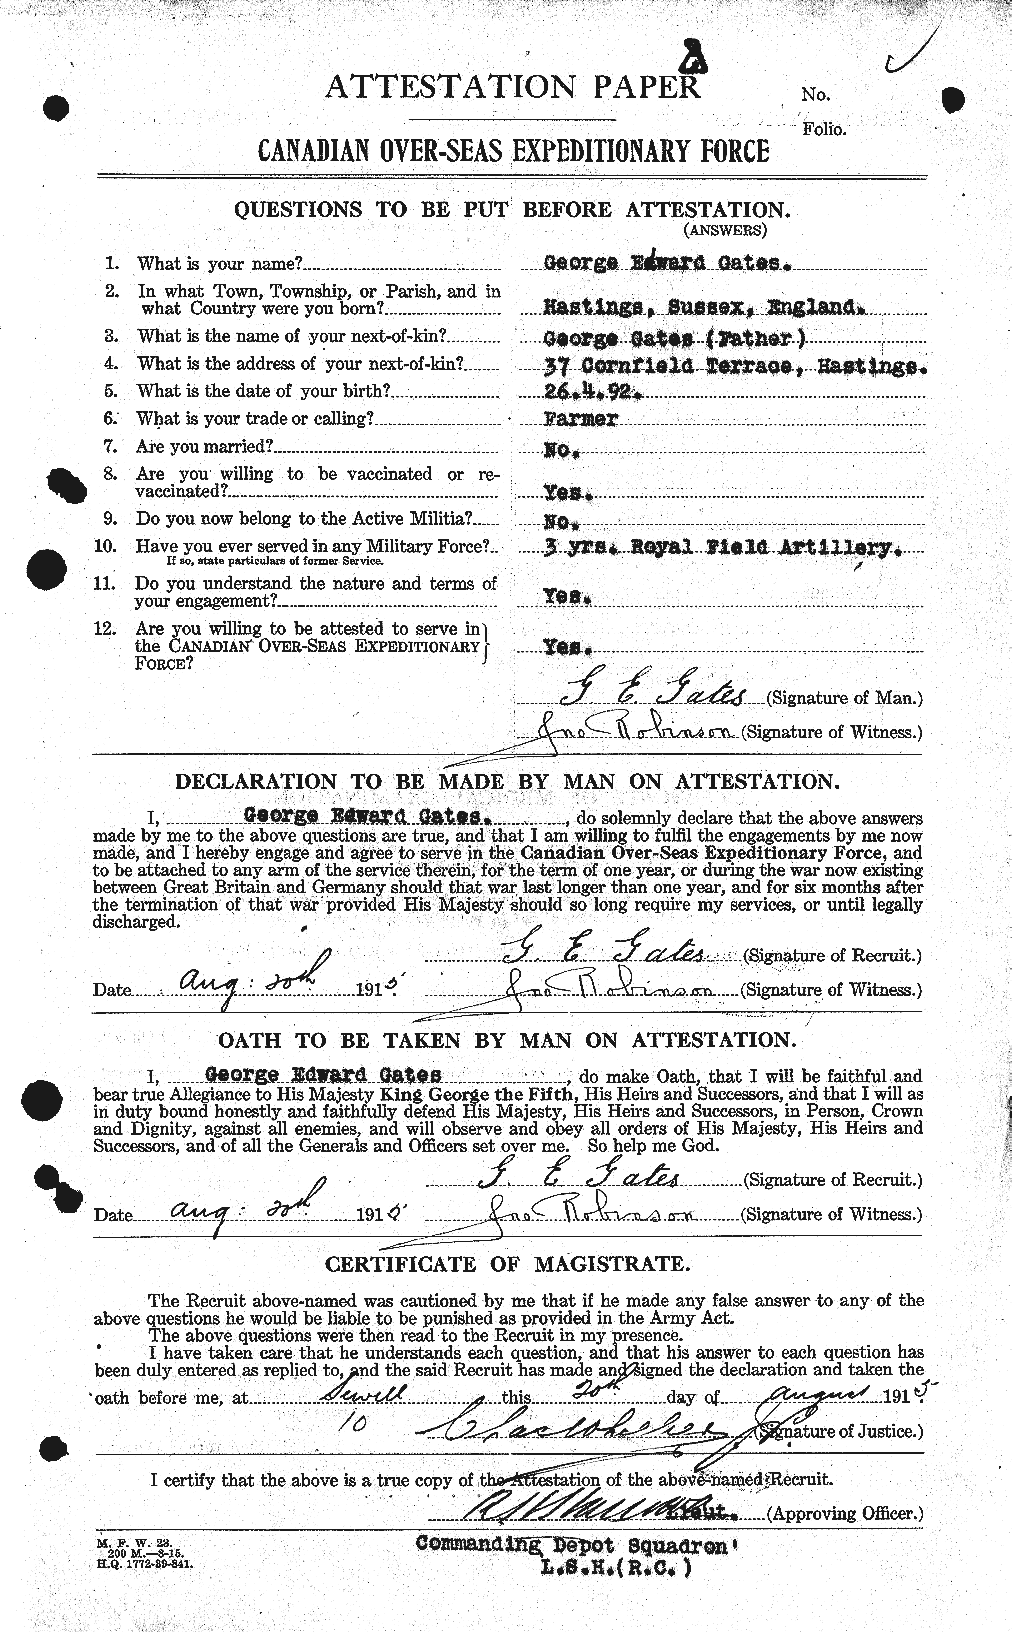 Personnel Records of the First World War - CEF 341746a